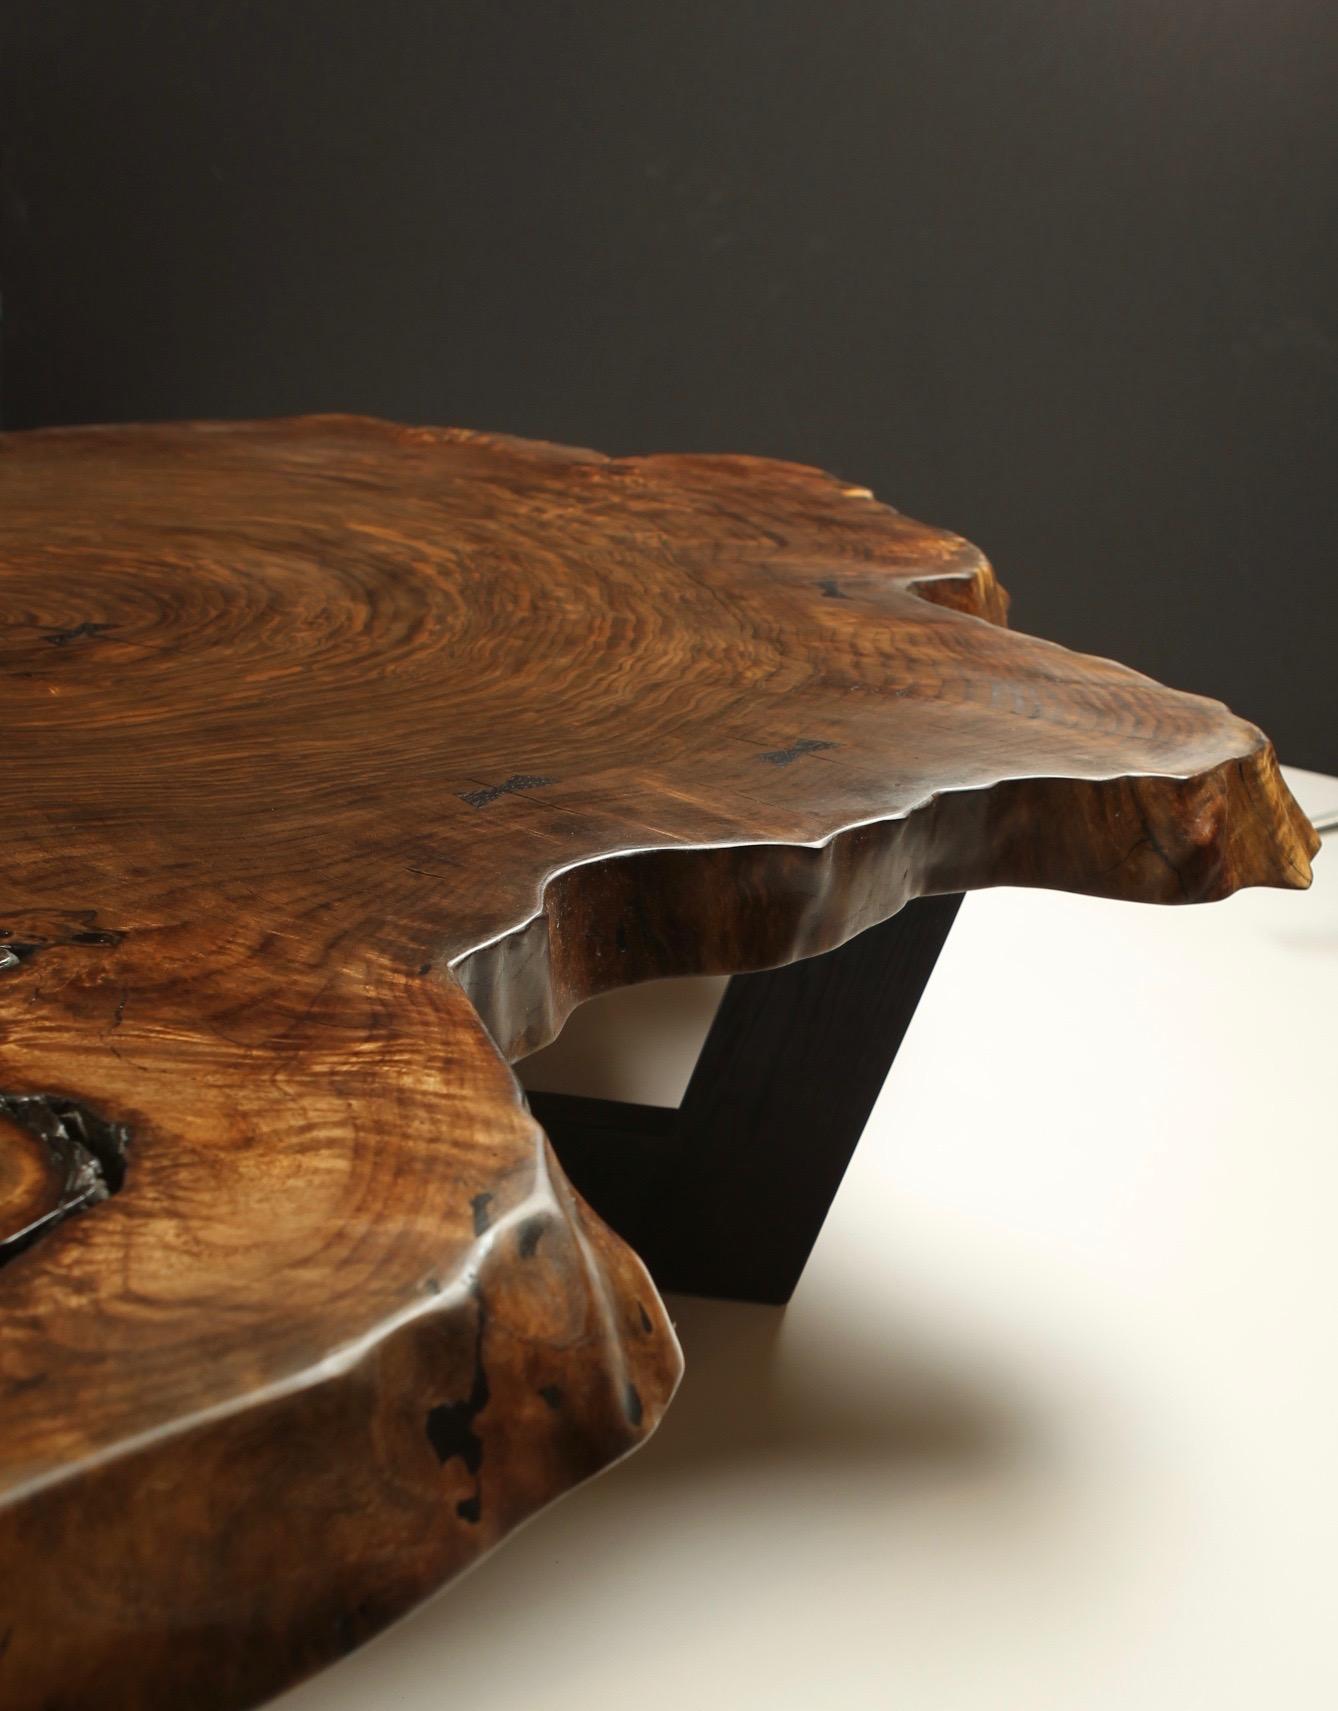 A huge cross-cut slab of Bastogne walnut set atop blackened oak legs. Gabon ebony inlays have been used to secure naturally occurring cracks. Handcrafted from one of our 